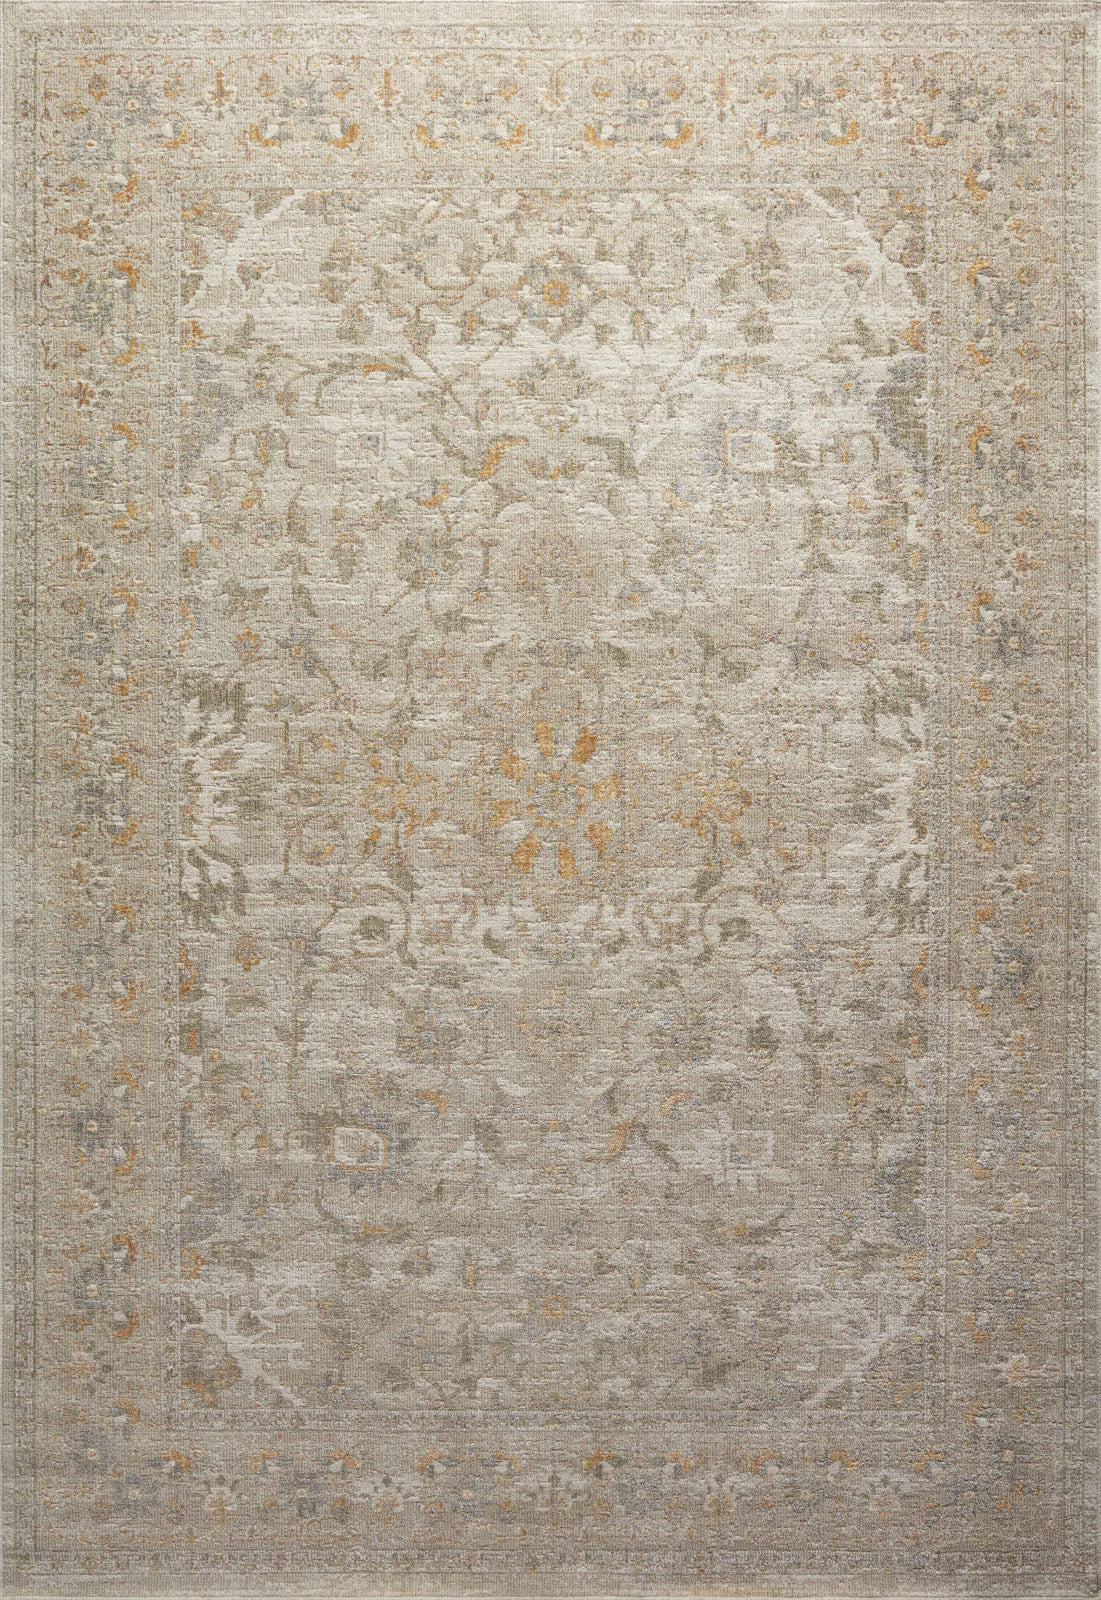 Loloi Rosemarie ROE-02 Ivory/Natural Area Rug by Chris Loves Julia Main Image